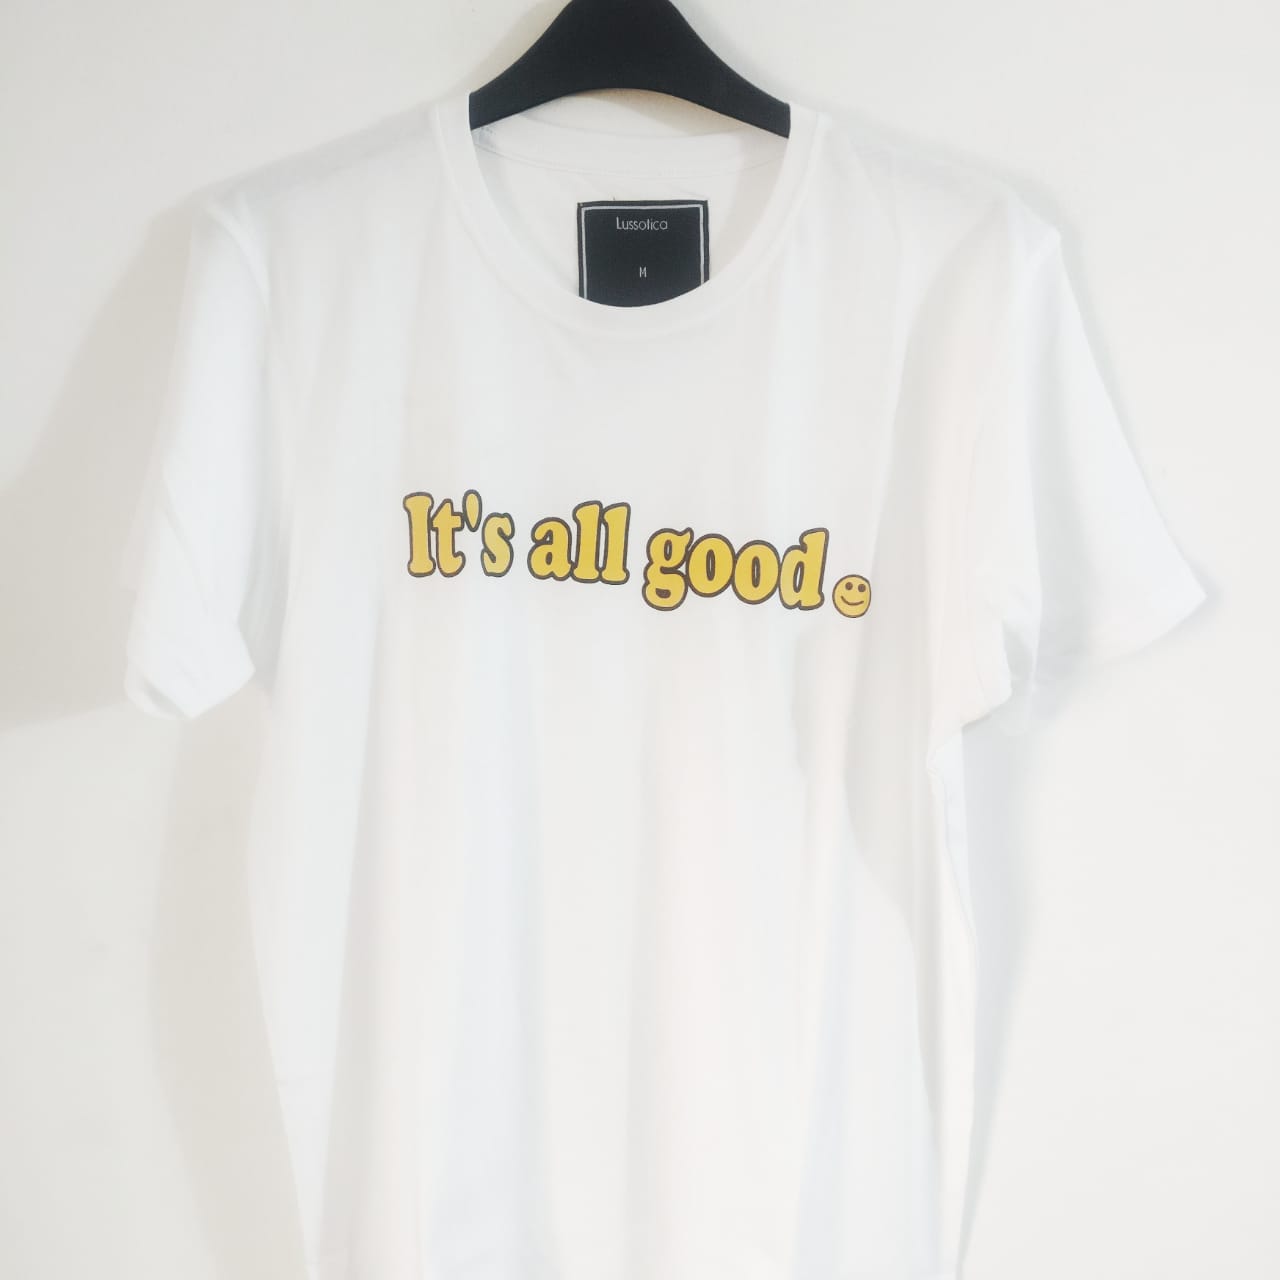 Graphic Tees by Lussotica - It’s all good